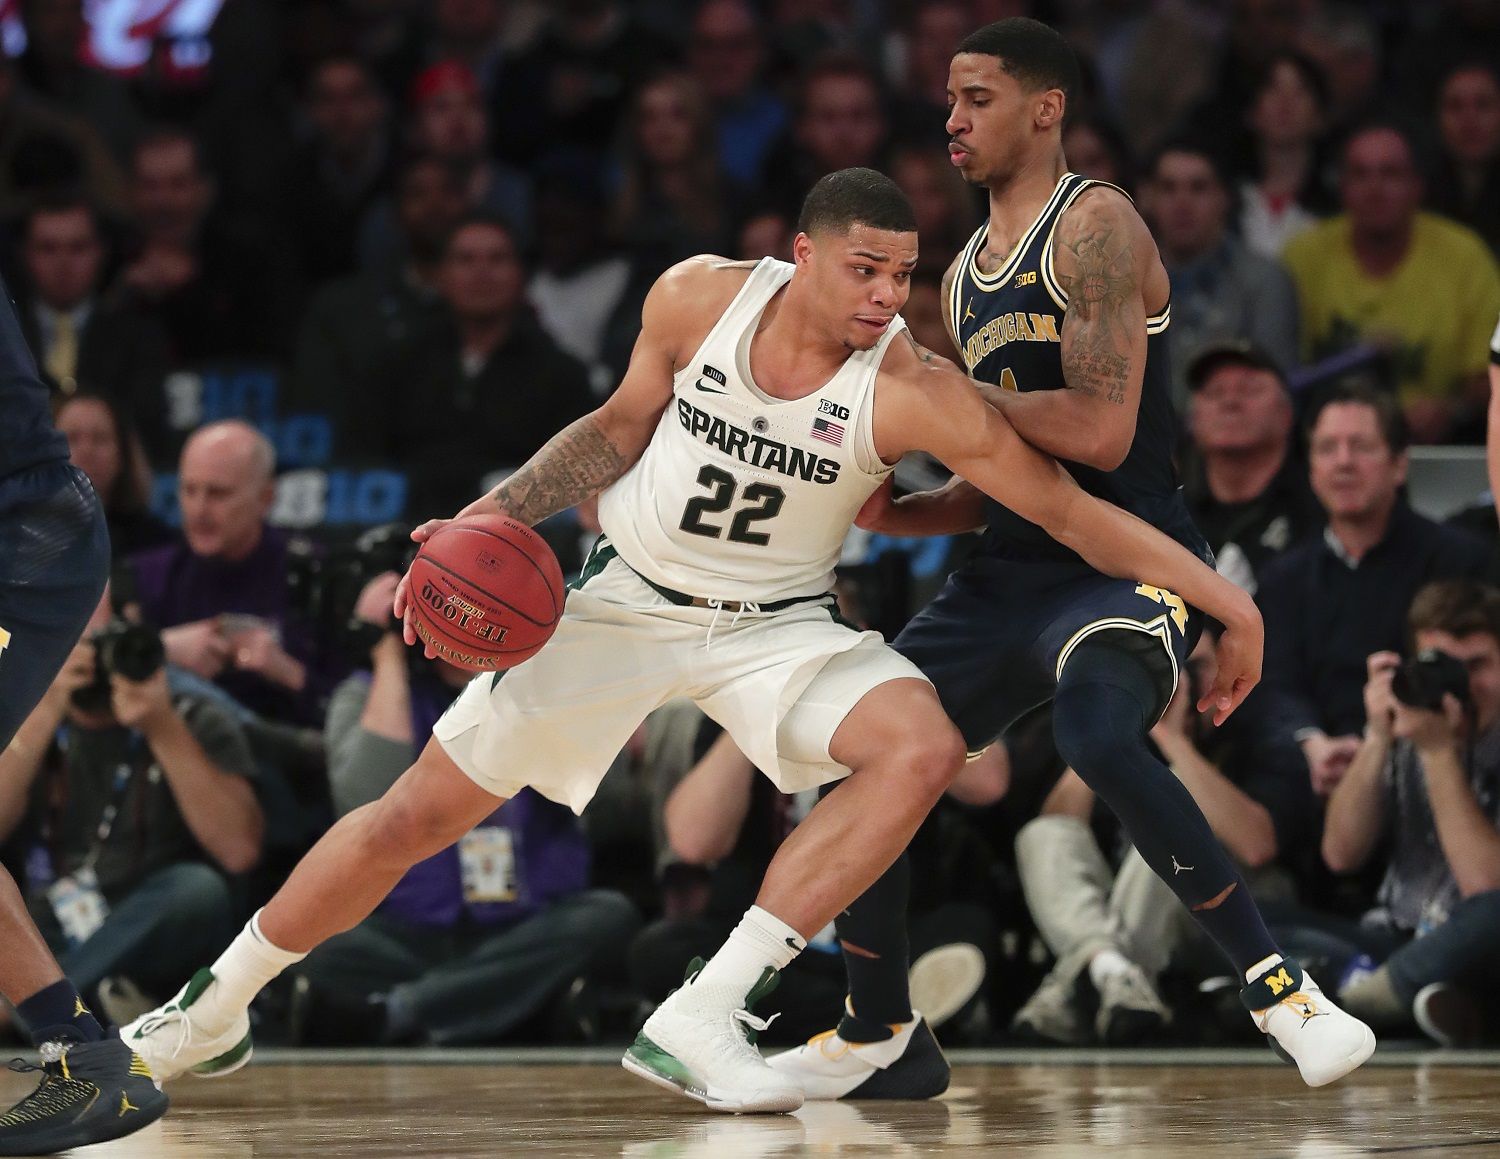 Michigan State guard Miles Bridges (22) drives against Michigan guard Charles Matthews (1) during the second half of an NCAA Big Ten Conference tournament semifinal college basketball game, Saturday, March 3, 2018, in New York. Michigan won 75-64. (AP Photo/Julie Jacobson)